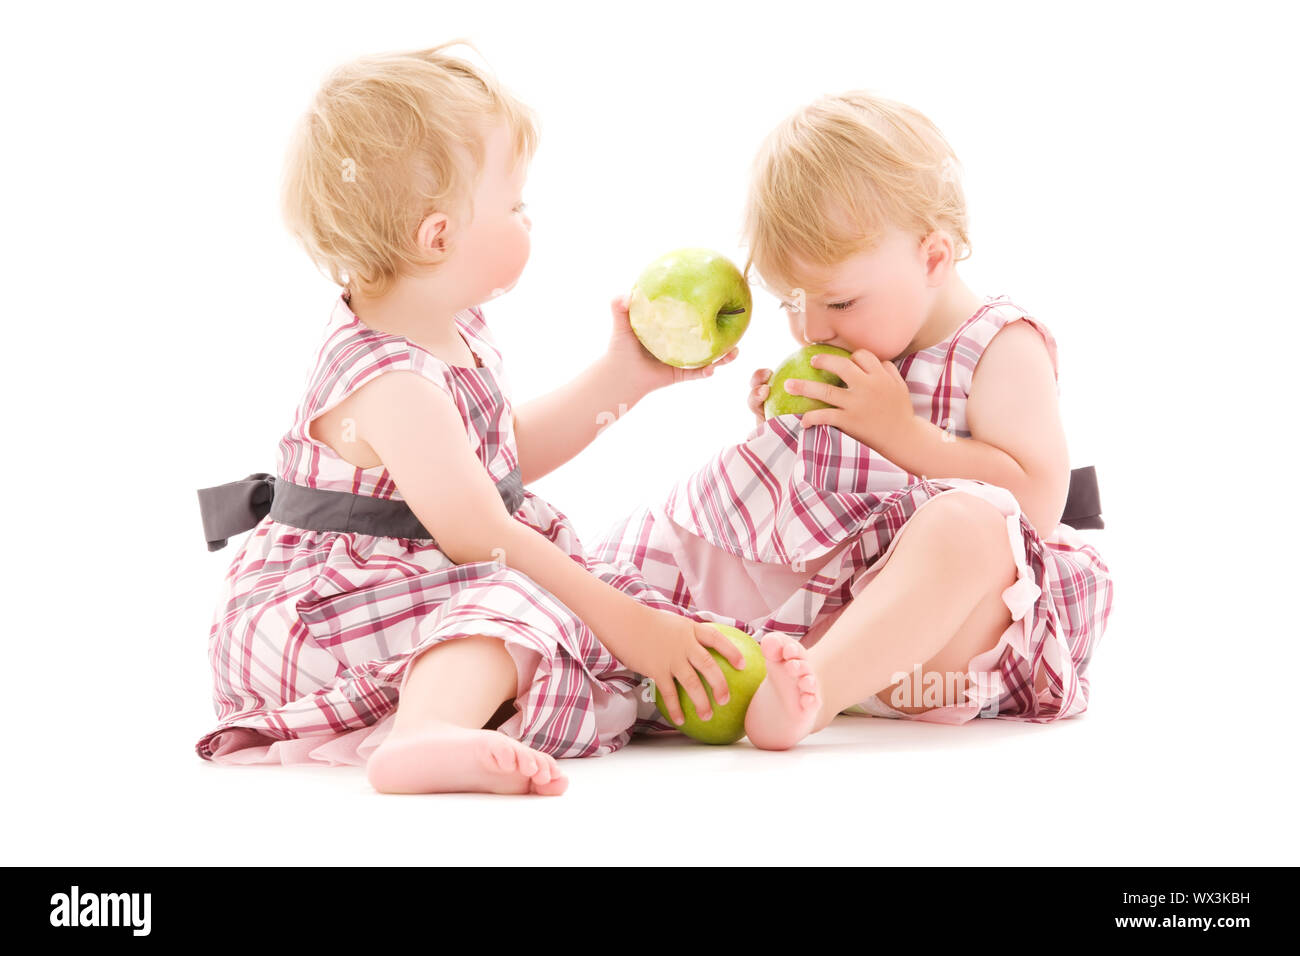 picture of two adorable twins over white Stock Photo